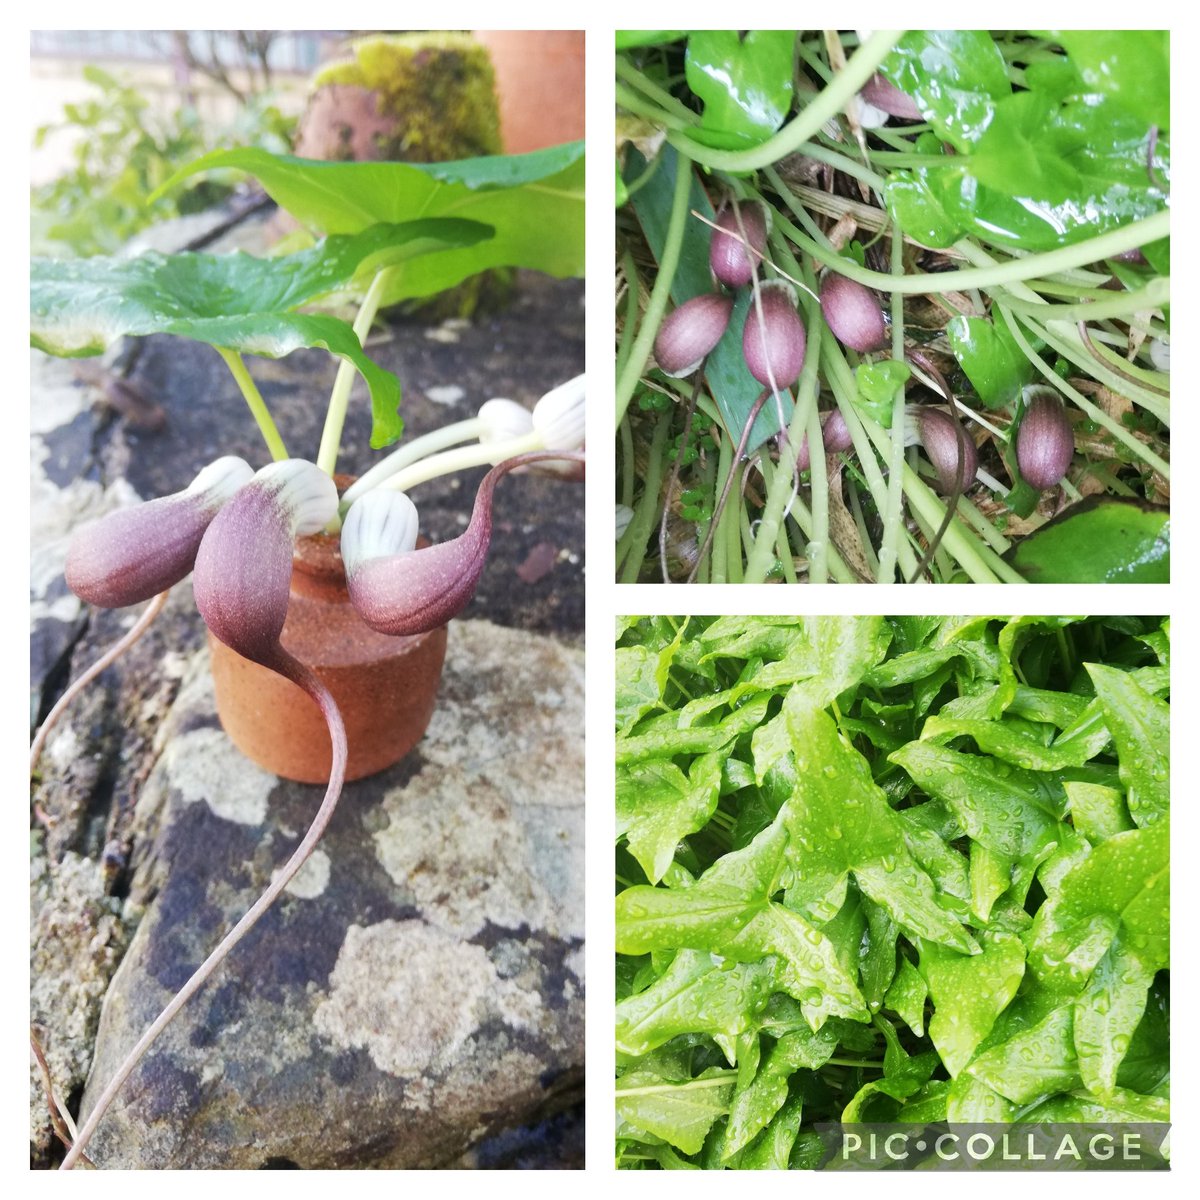 Nothing to see here - until you part those sagittate leaves & spot the unusual flower of the mouse plant, Arisarum proboscideum. Look at those tails! I know what you're thinking - why grow a plant with hidden flowers? Maybe just for fun. Here's a pot of mice for #GardensHour.